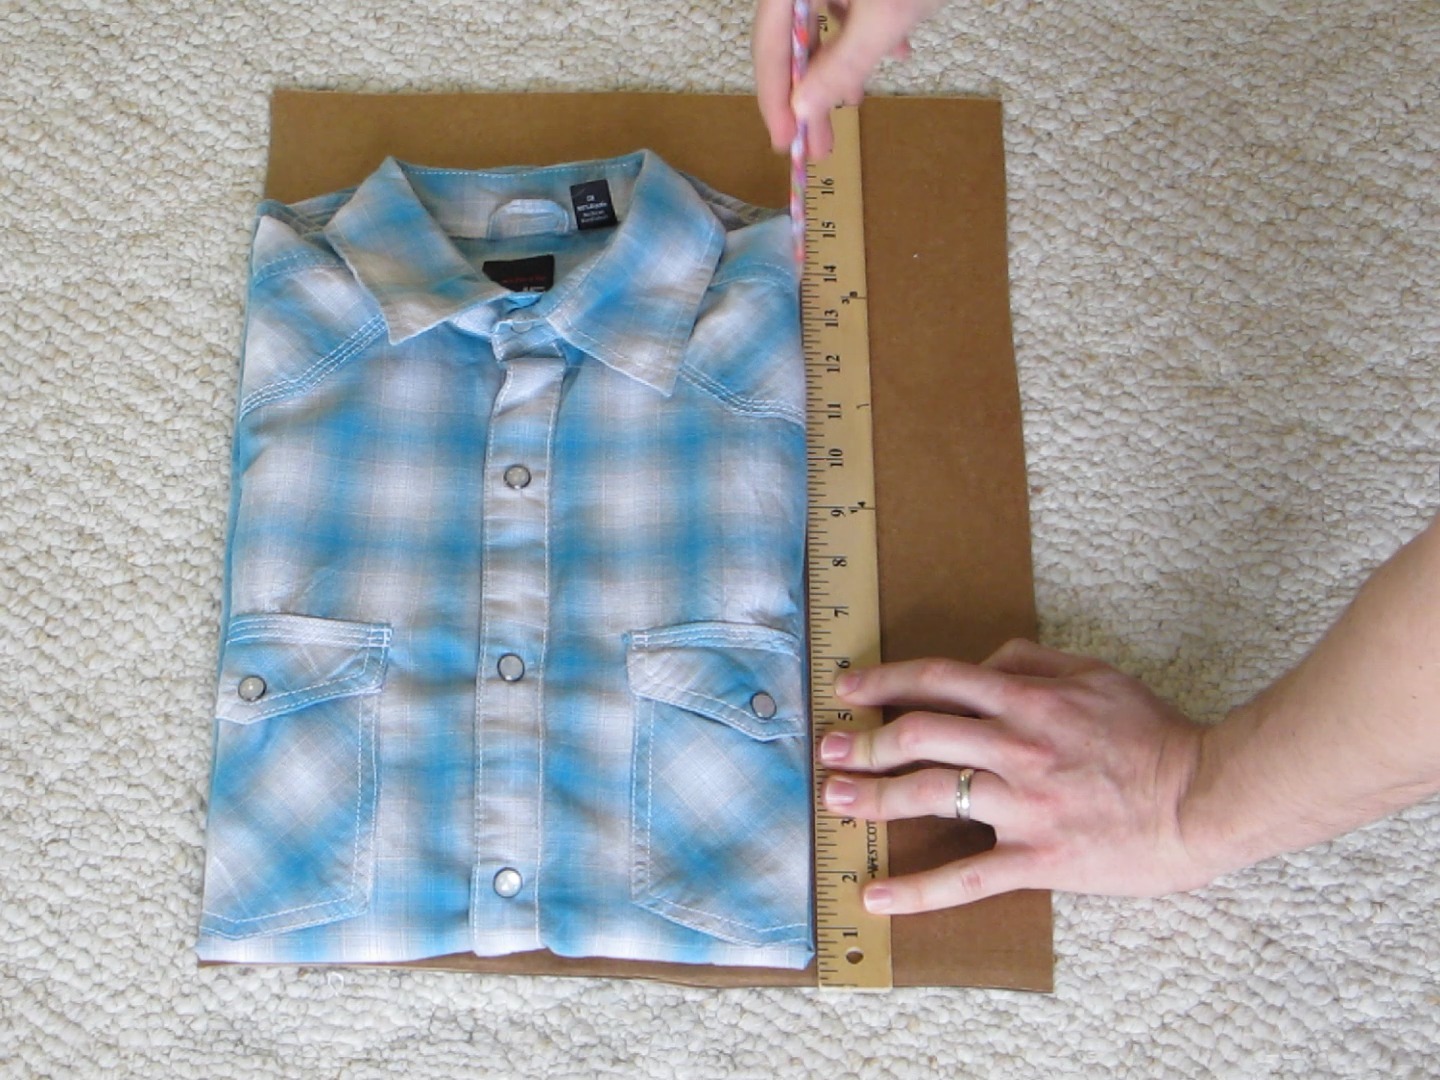 How to Fold a t-shirt using cardboard